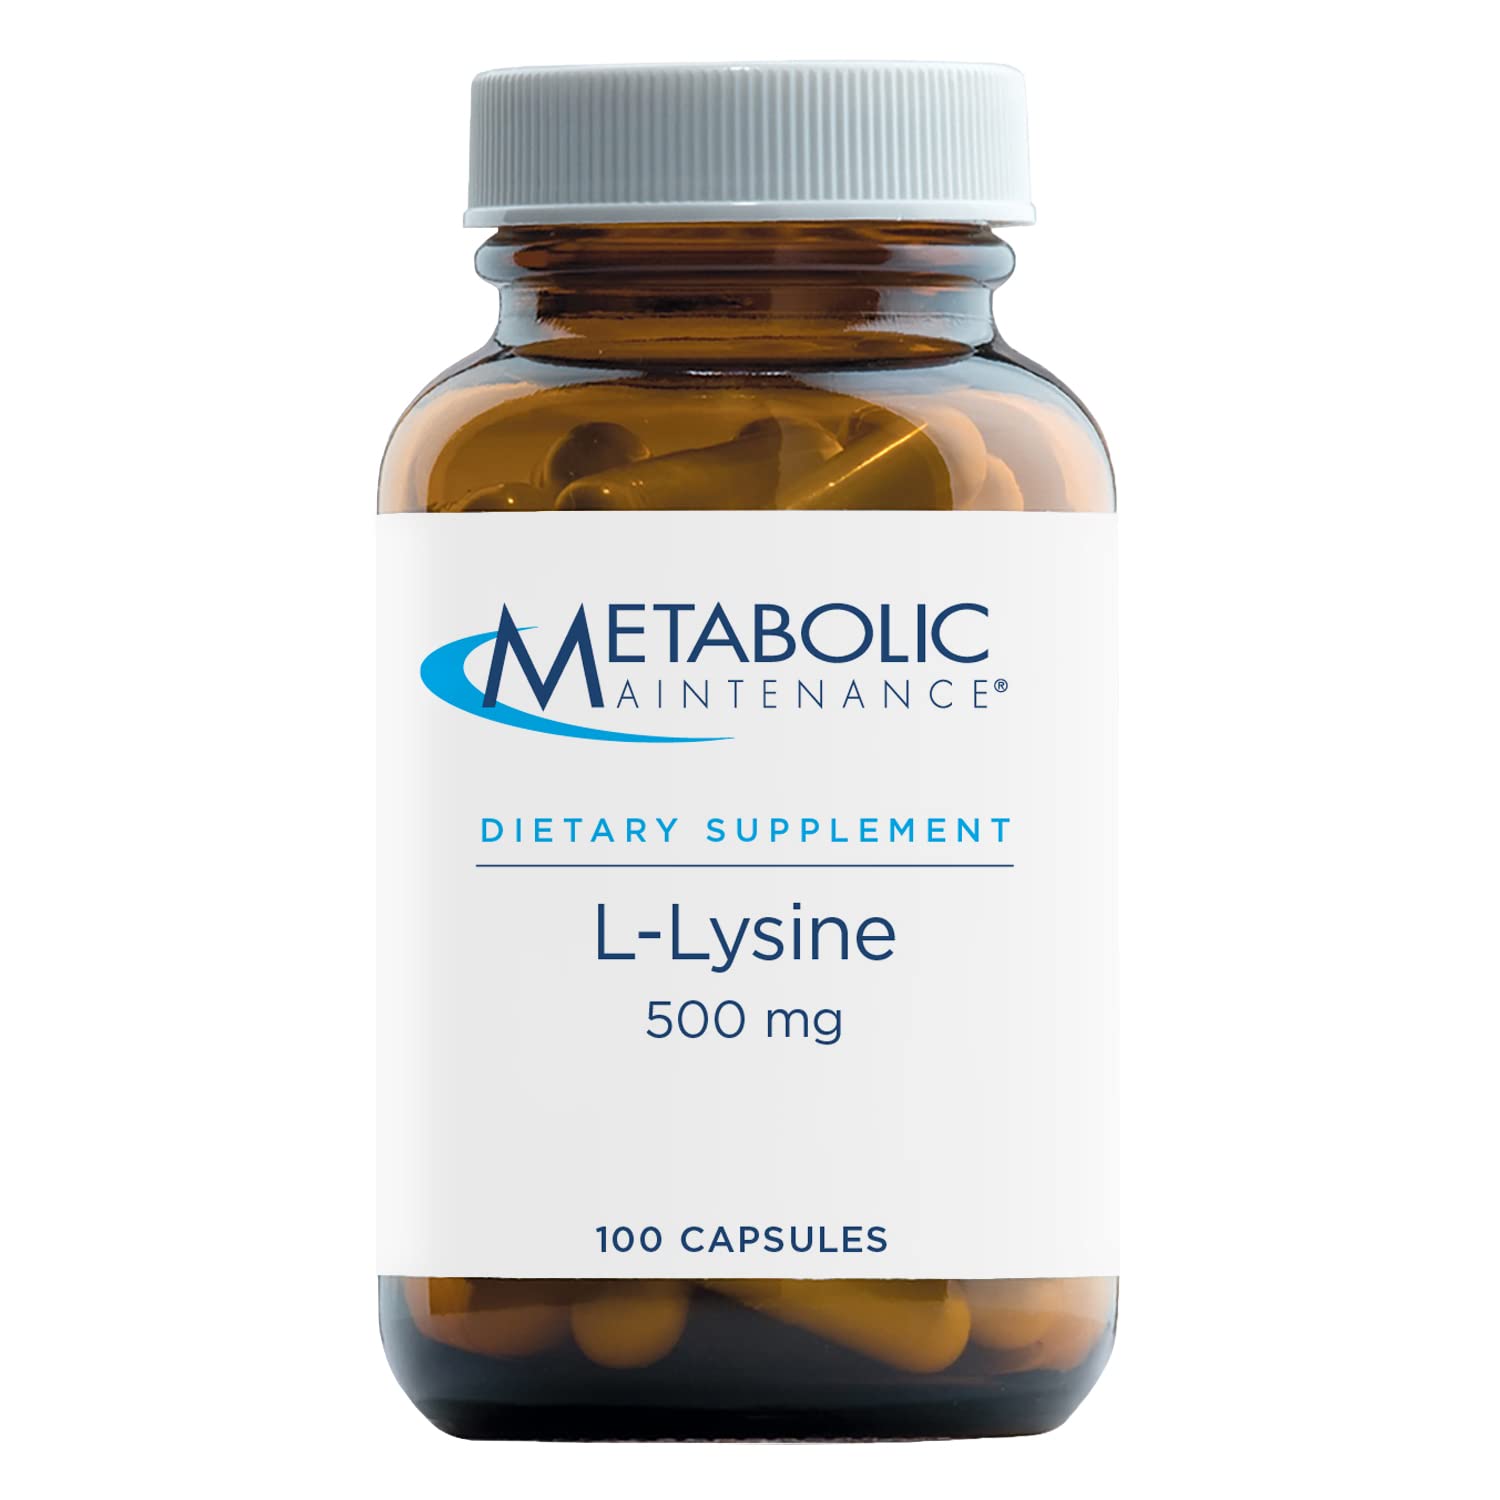 Metabolic Maintenance L-Lysine - Pure 500mg Amino Acid Supplement, Vegan + No Fillers - Immune, Bone + Connective Tissue Support - 'Free Form' for Superior Absorption (100 Capsules)